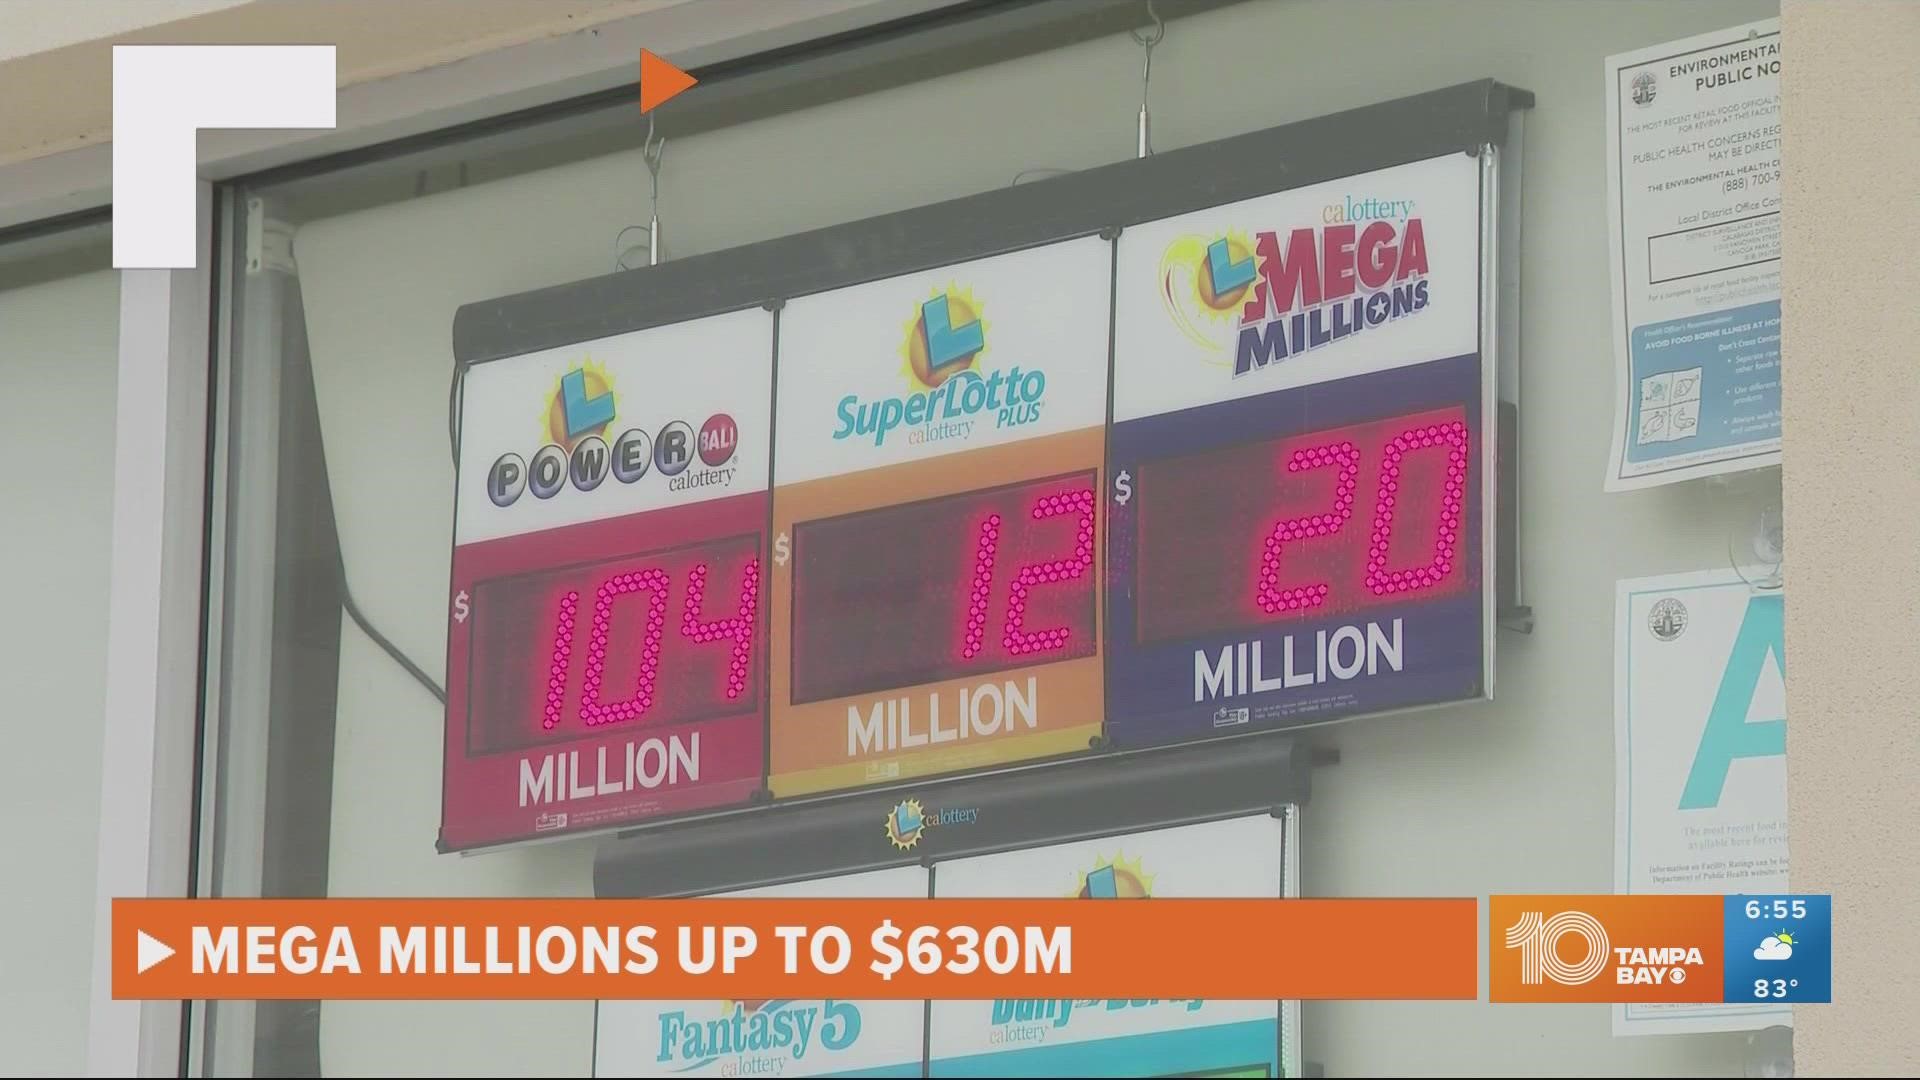 In order to win the jackpot, a winner needs to get all five numbers correct as well as the Mega Millions number.